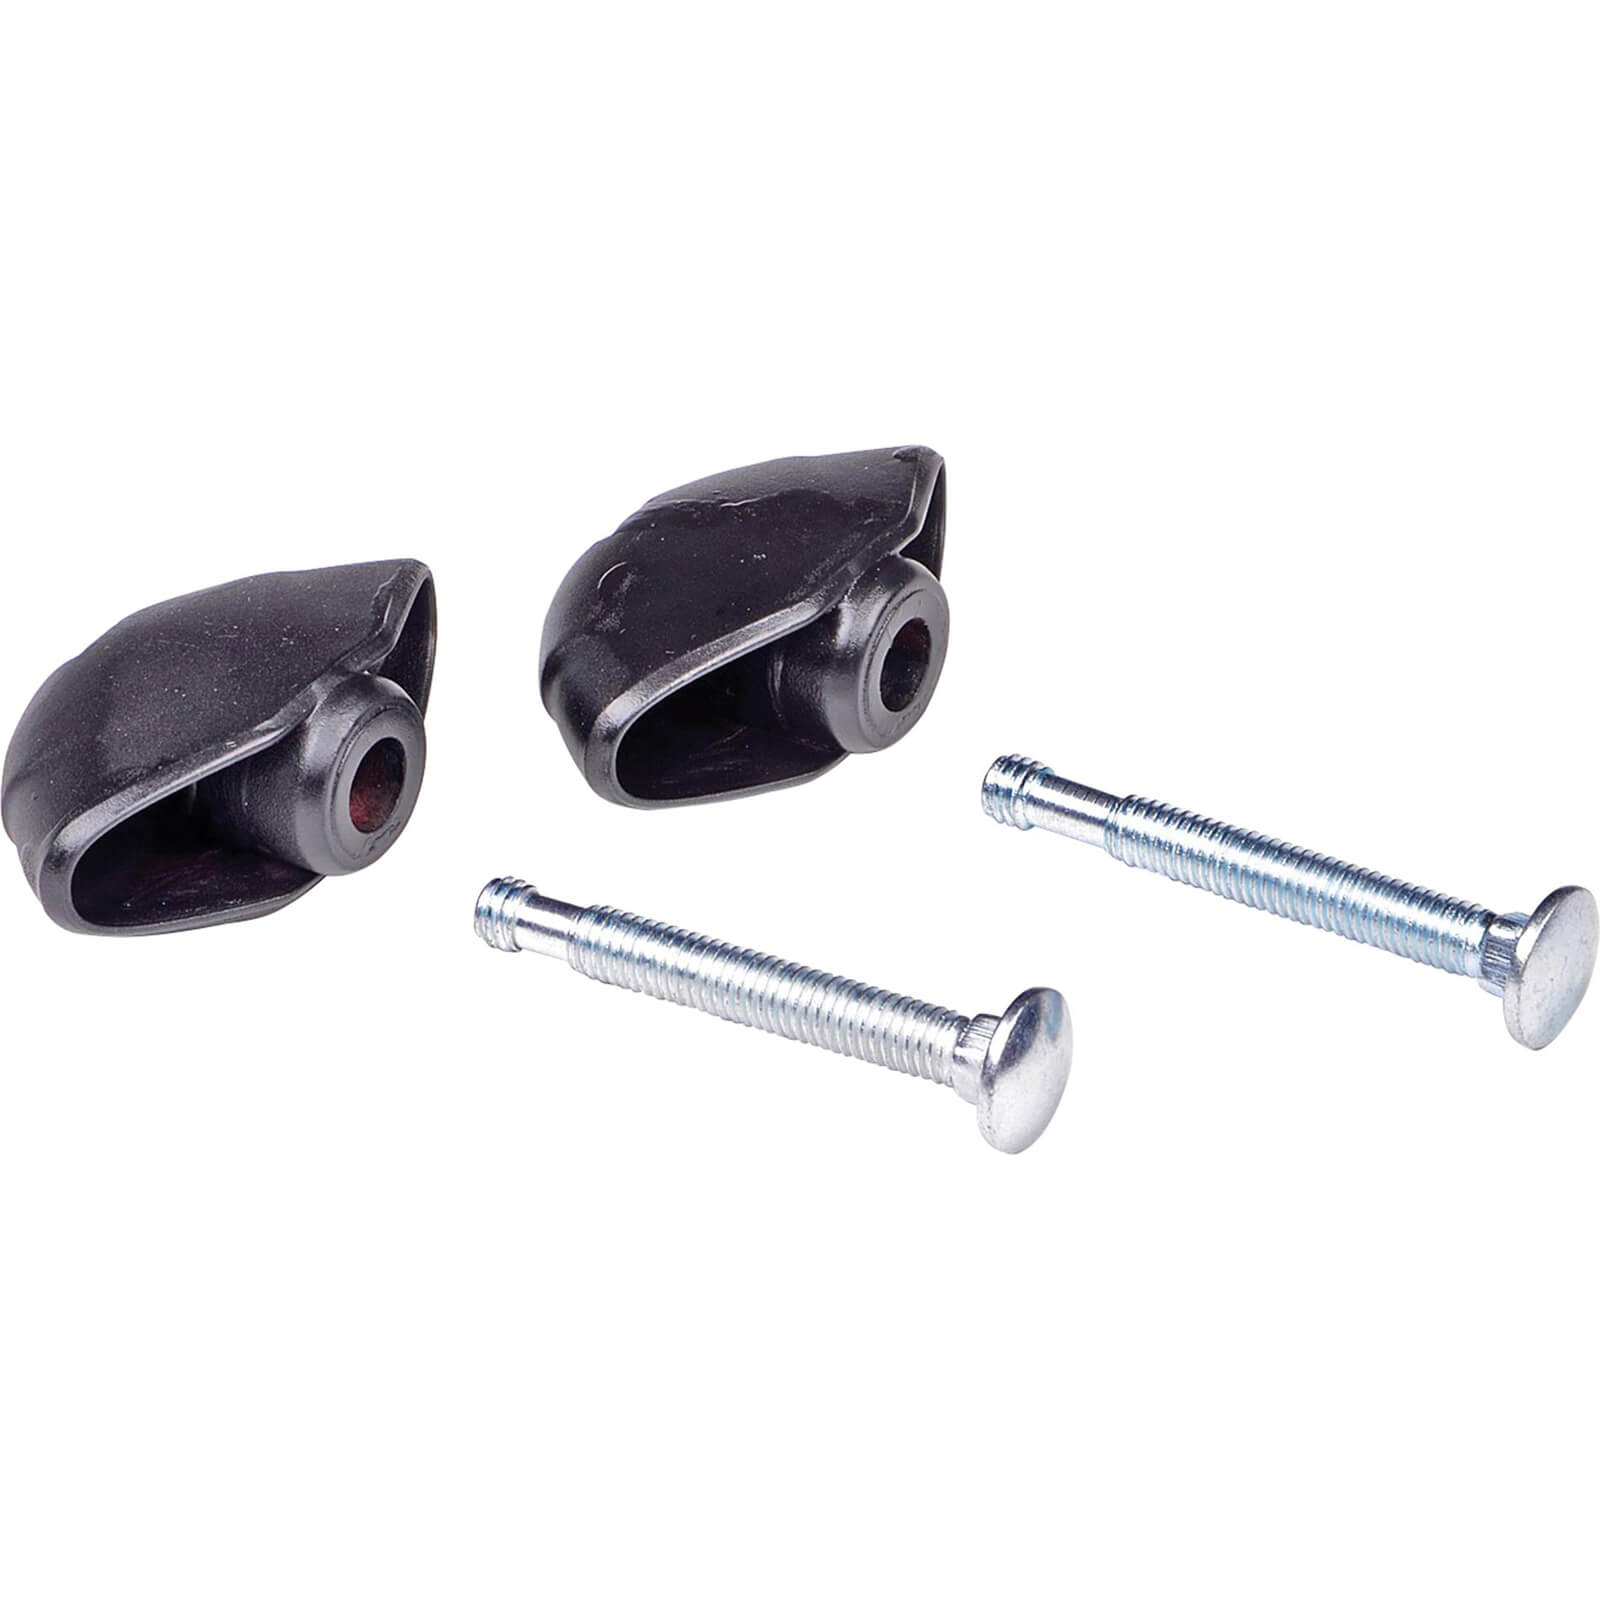 Photo of Alm Fl198 Handle Fingerwheels And Bolts Fits Many Flymo Hover And Wheeled Lawnmowers